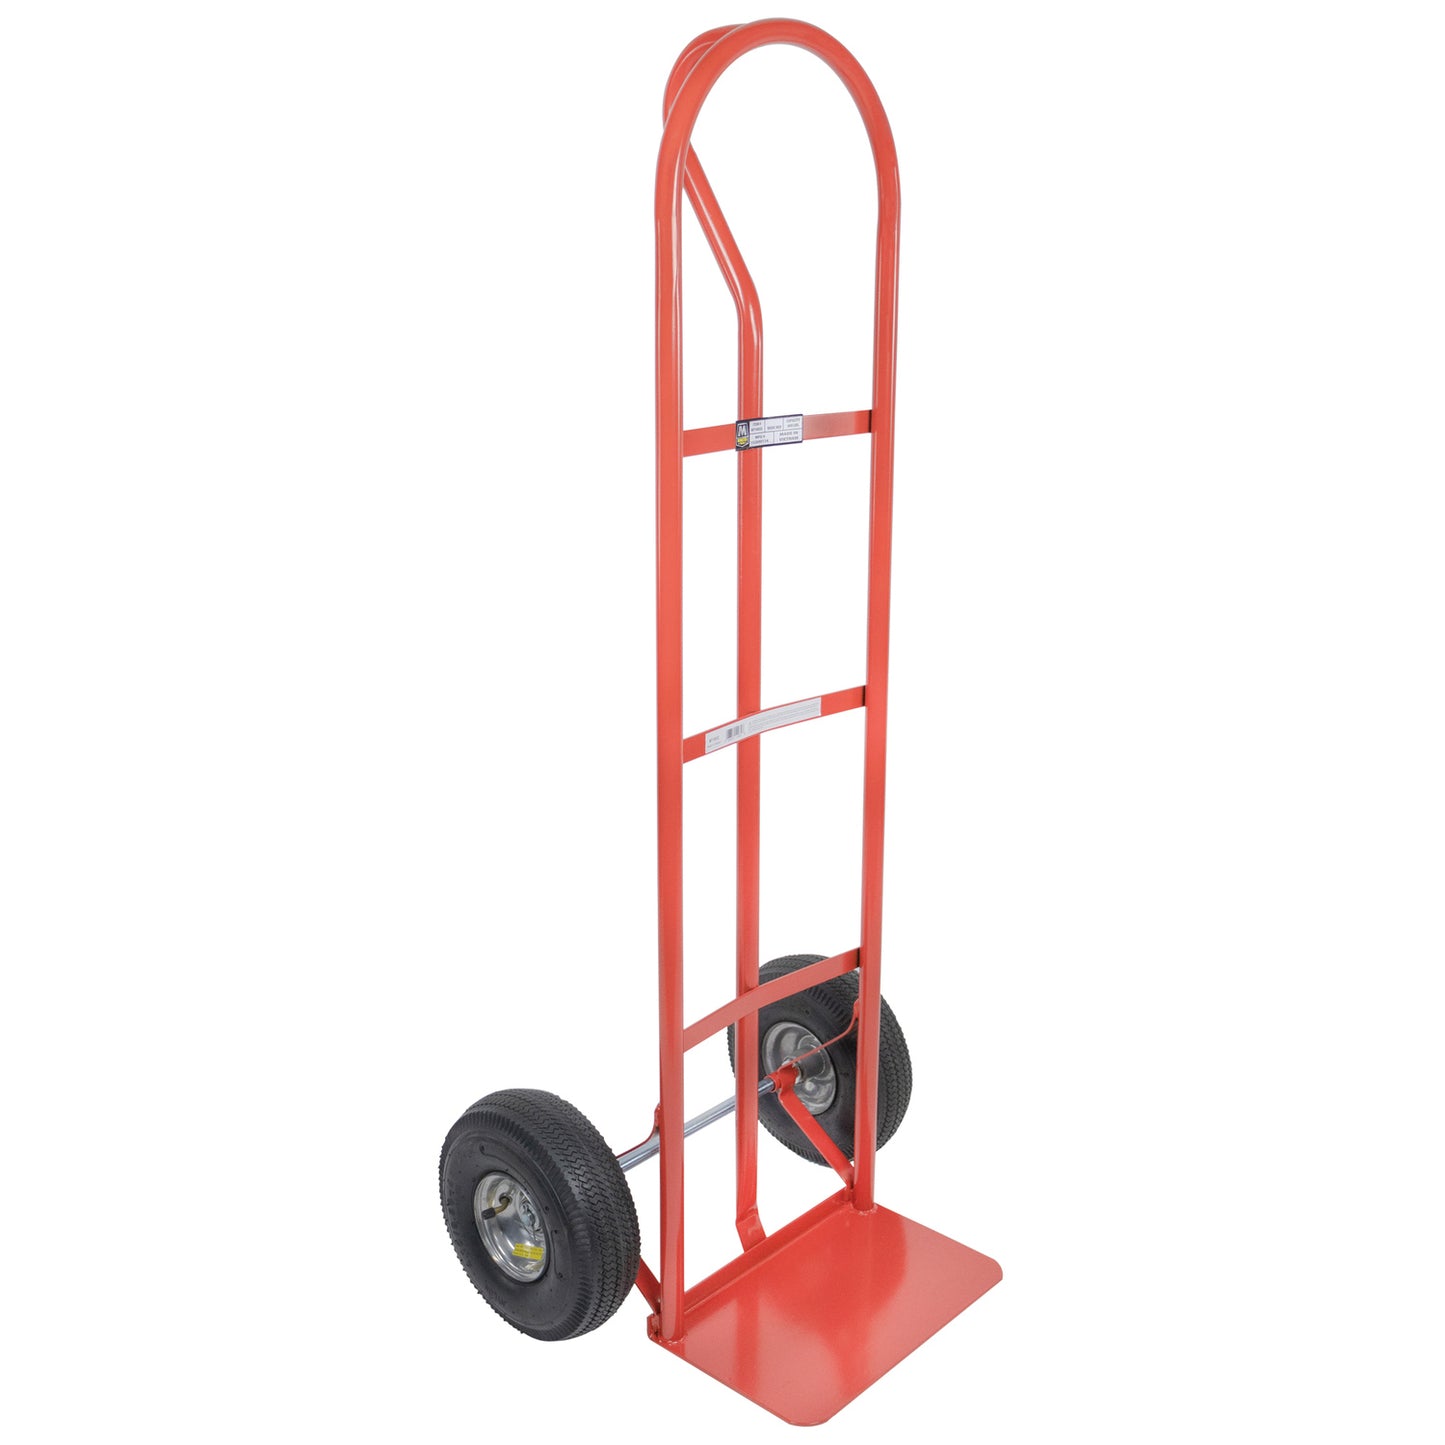 Steel Hand Truck. 600 lb. Load Capacity. 19.5" x 22.75 x 51.5". Nose Plate - 14" x 8.7